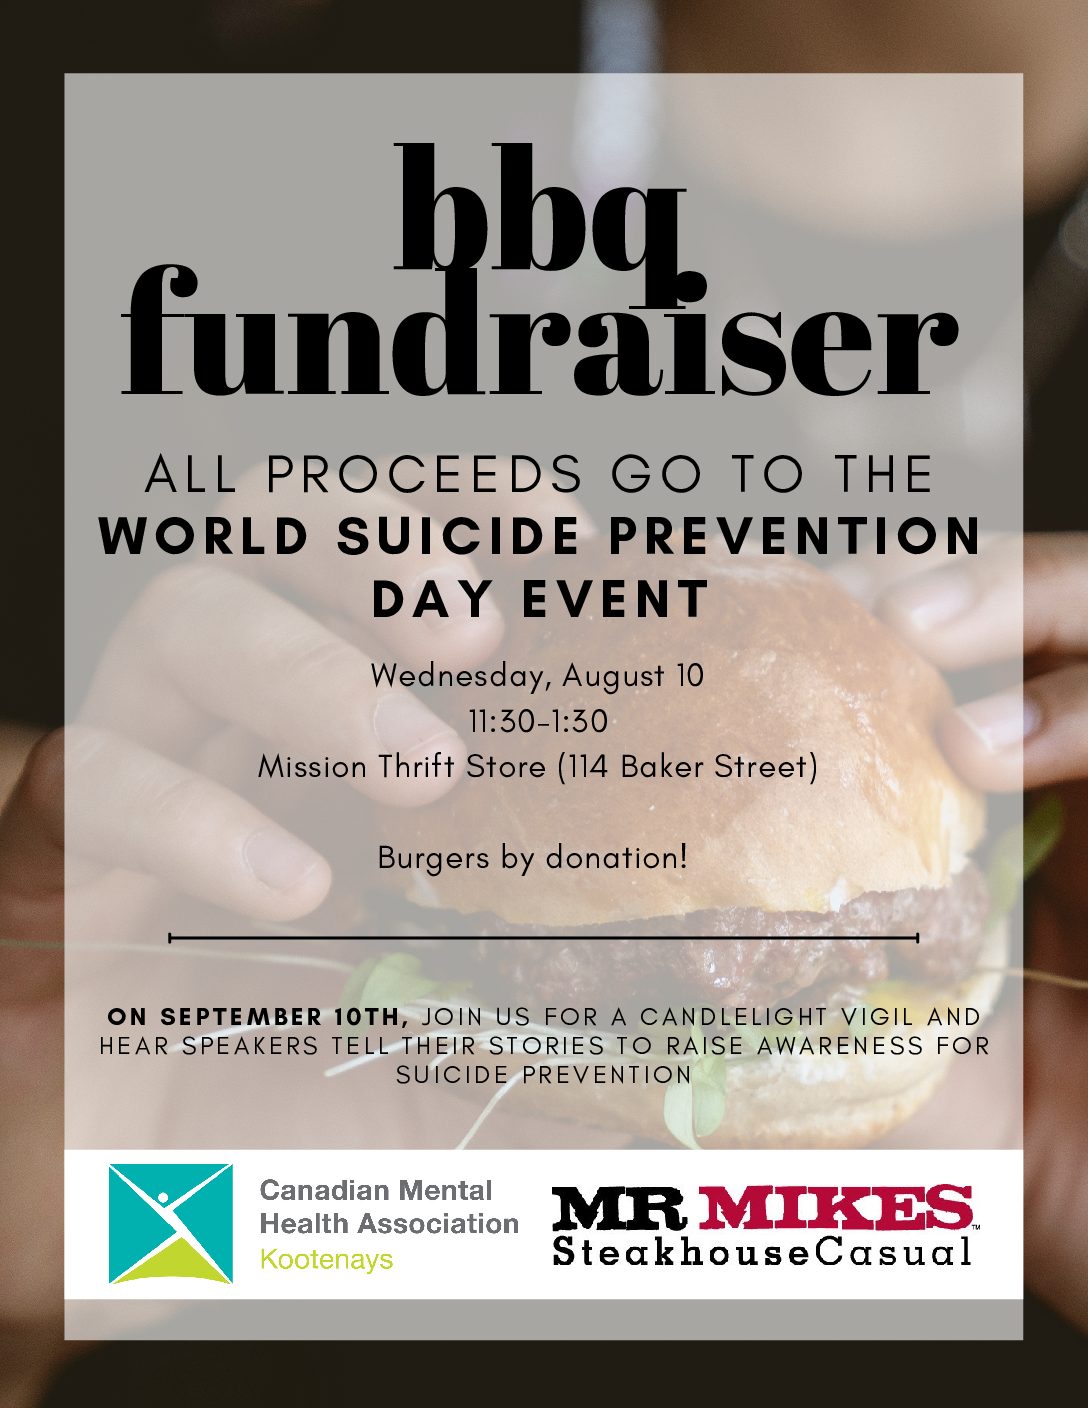 BBQ Fundraiser for World Suicide Prevention Day